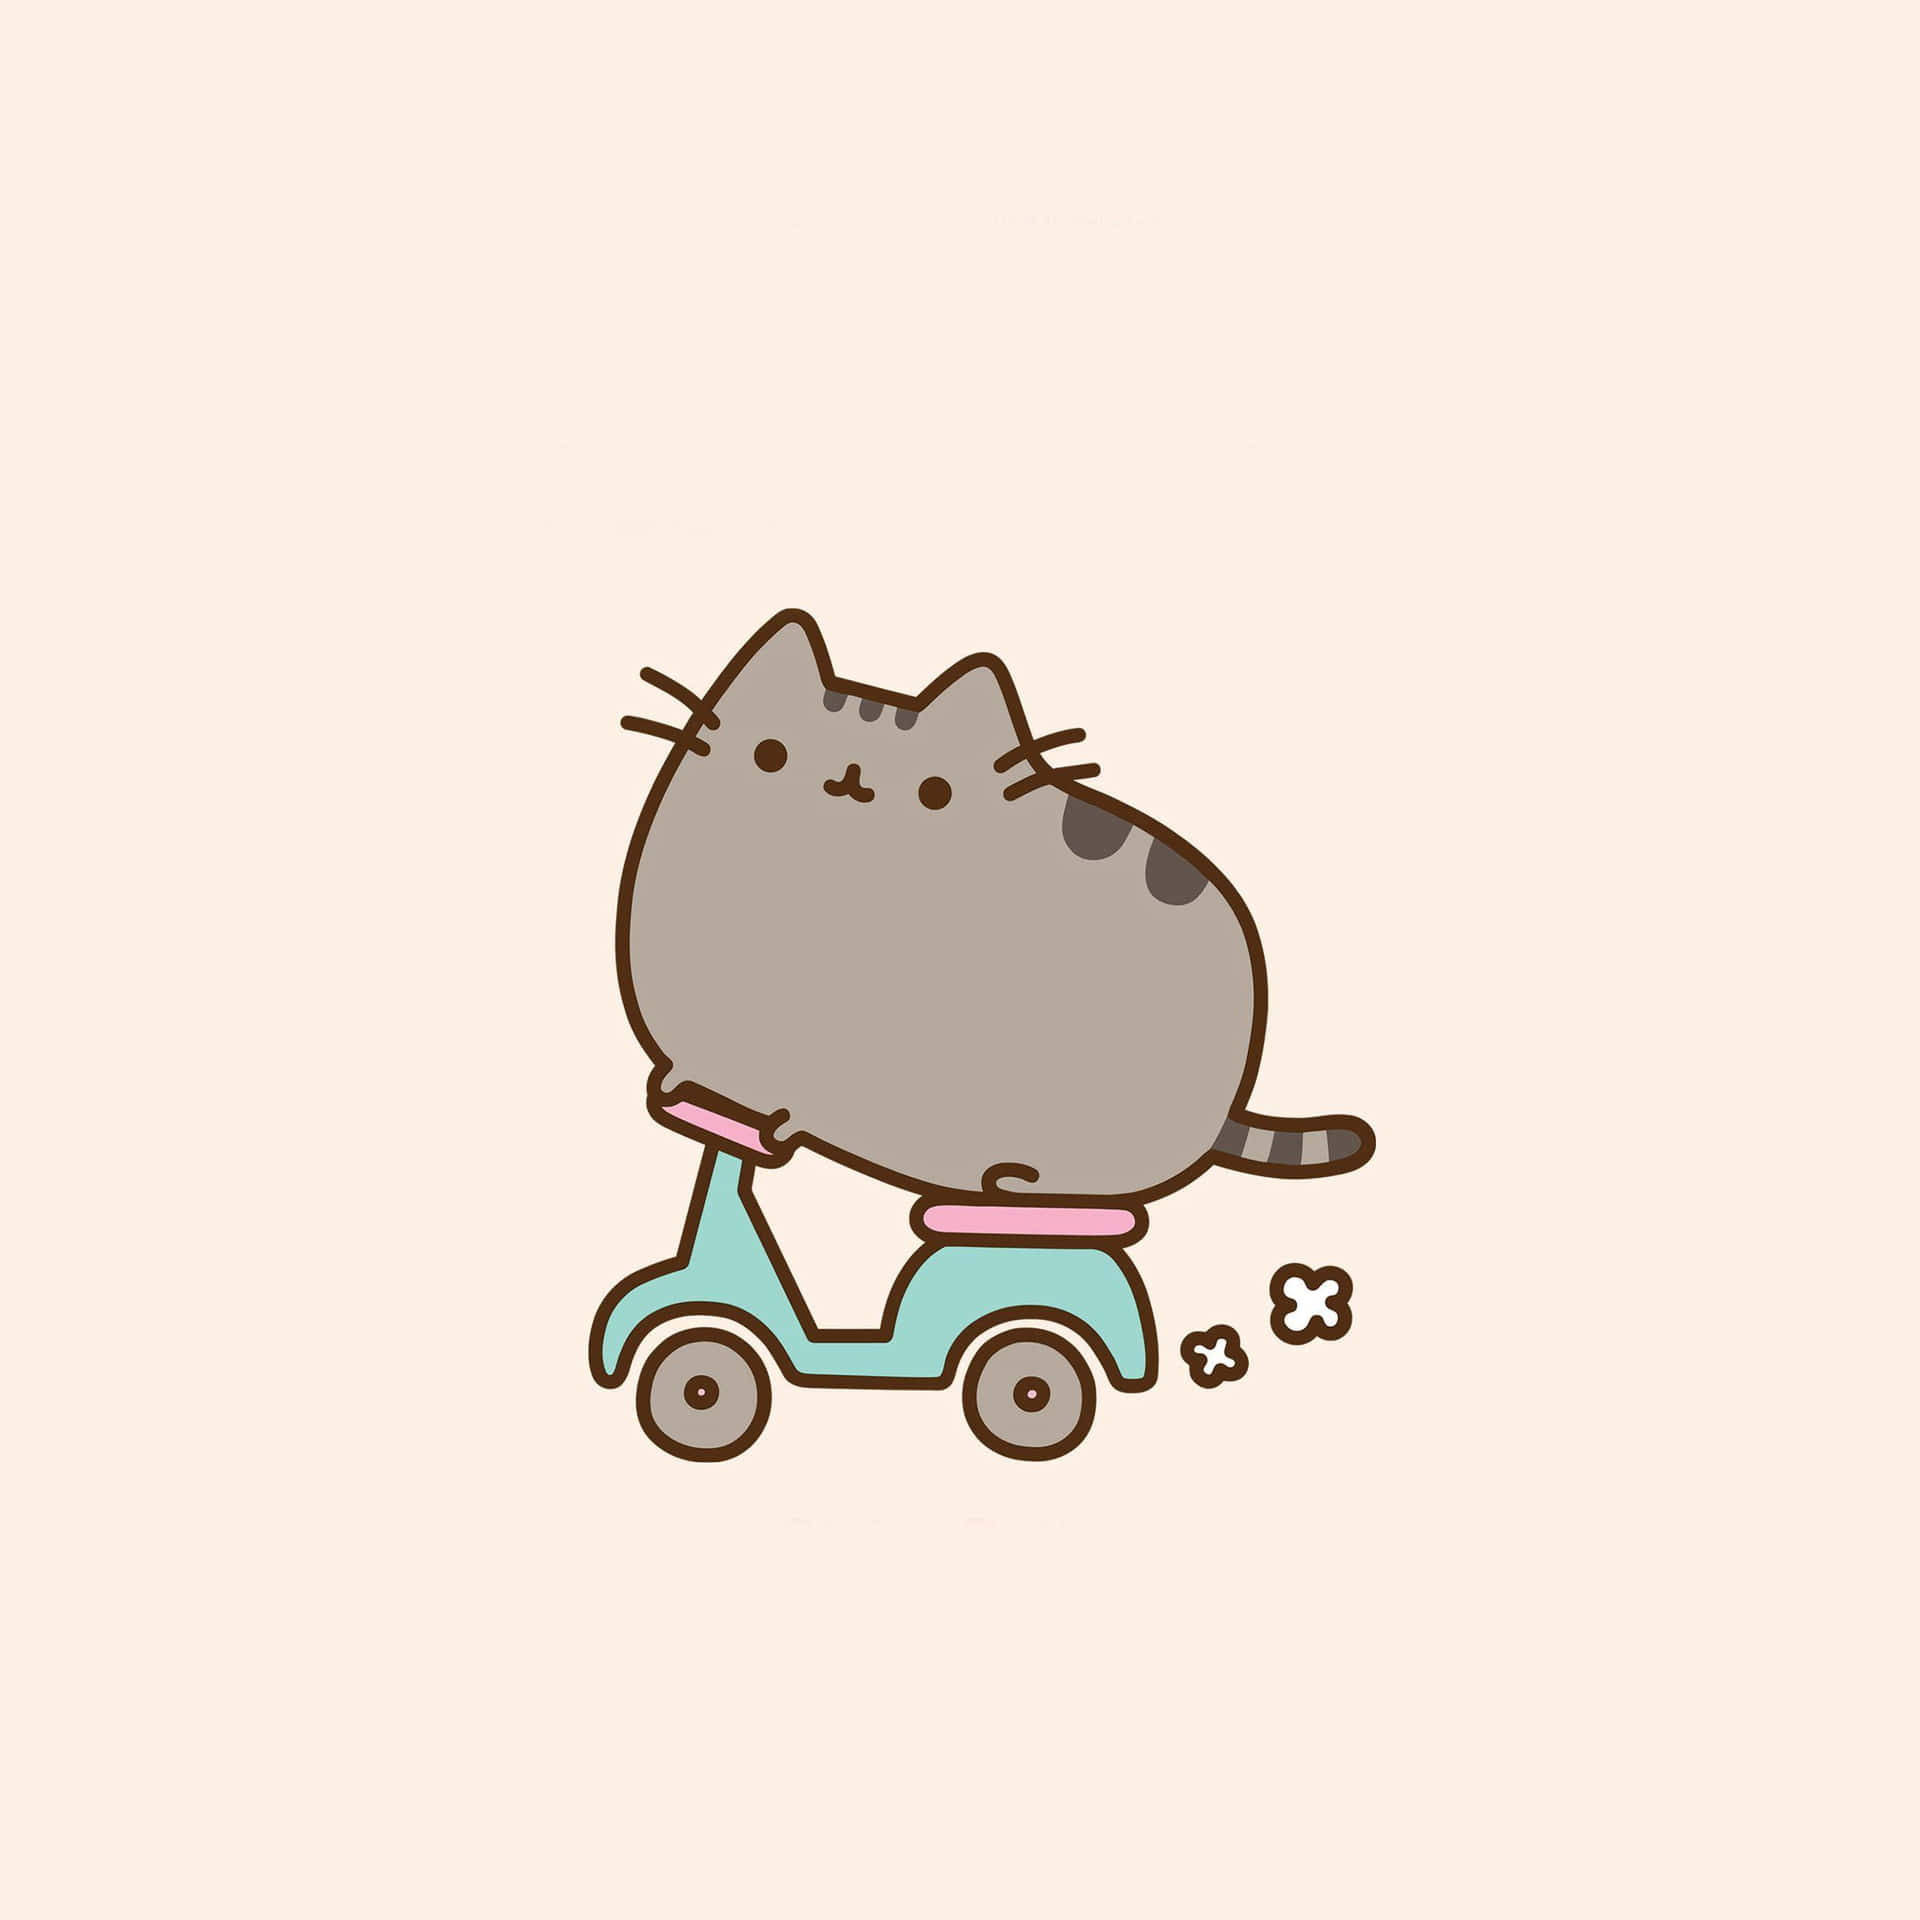 Get your paws on the limited Pusheen PC! Wallpaper